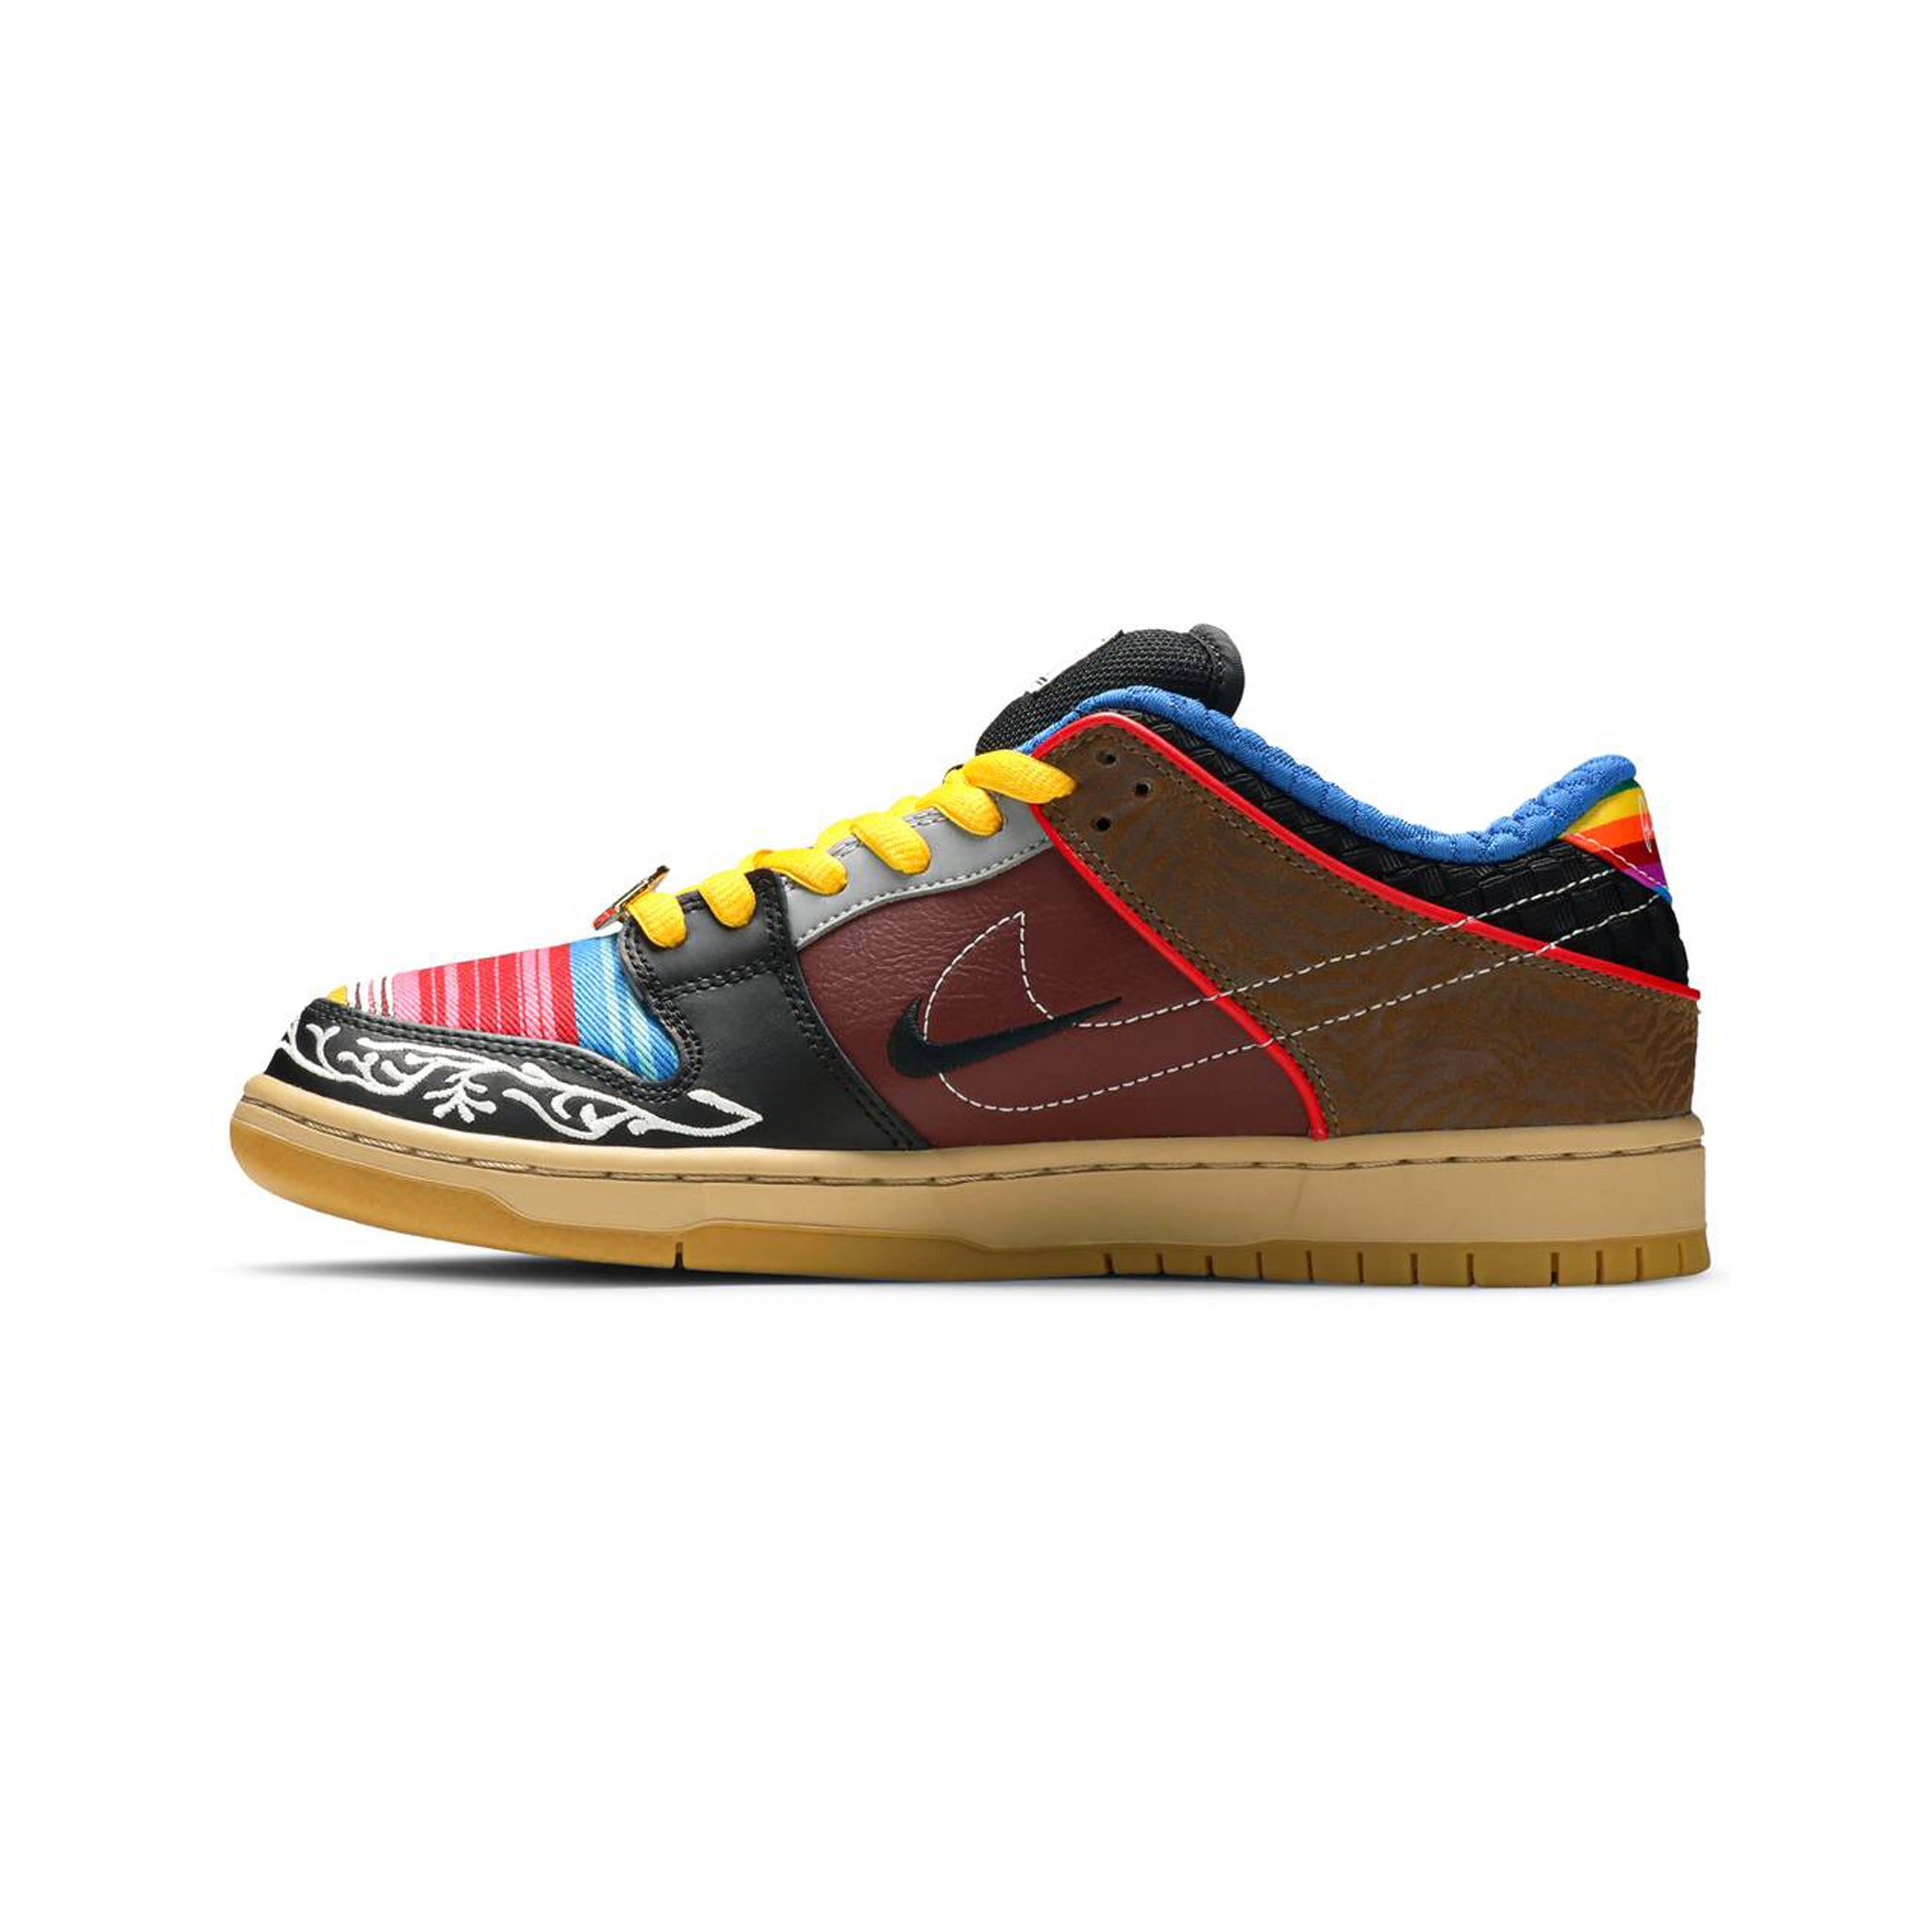 NIKE SB DUNK LOW WHAT THE PAUL